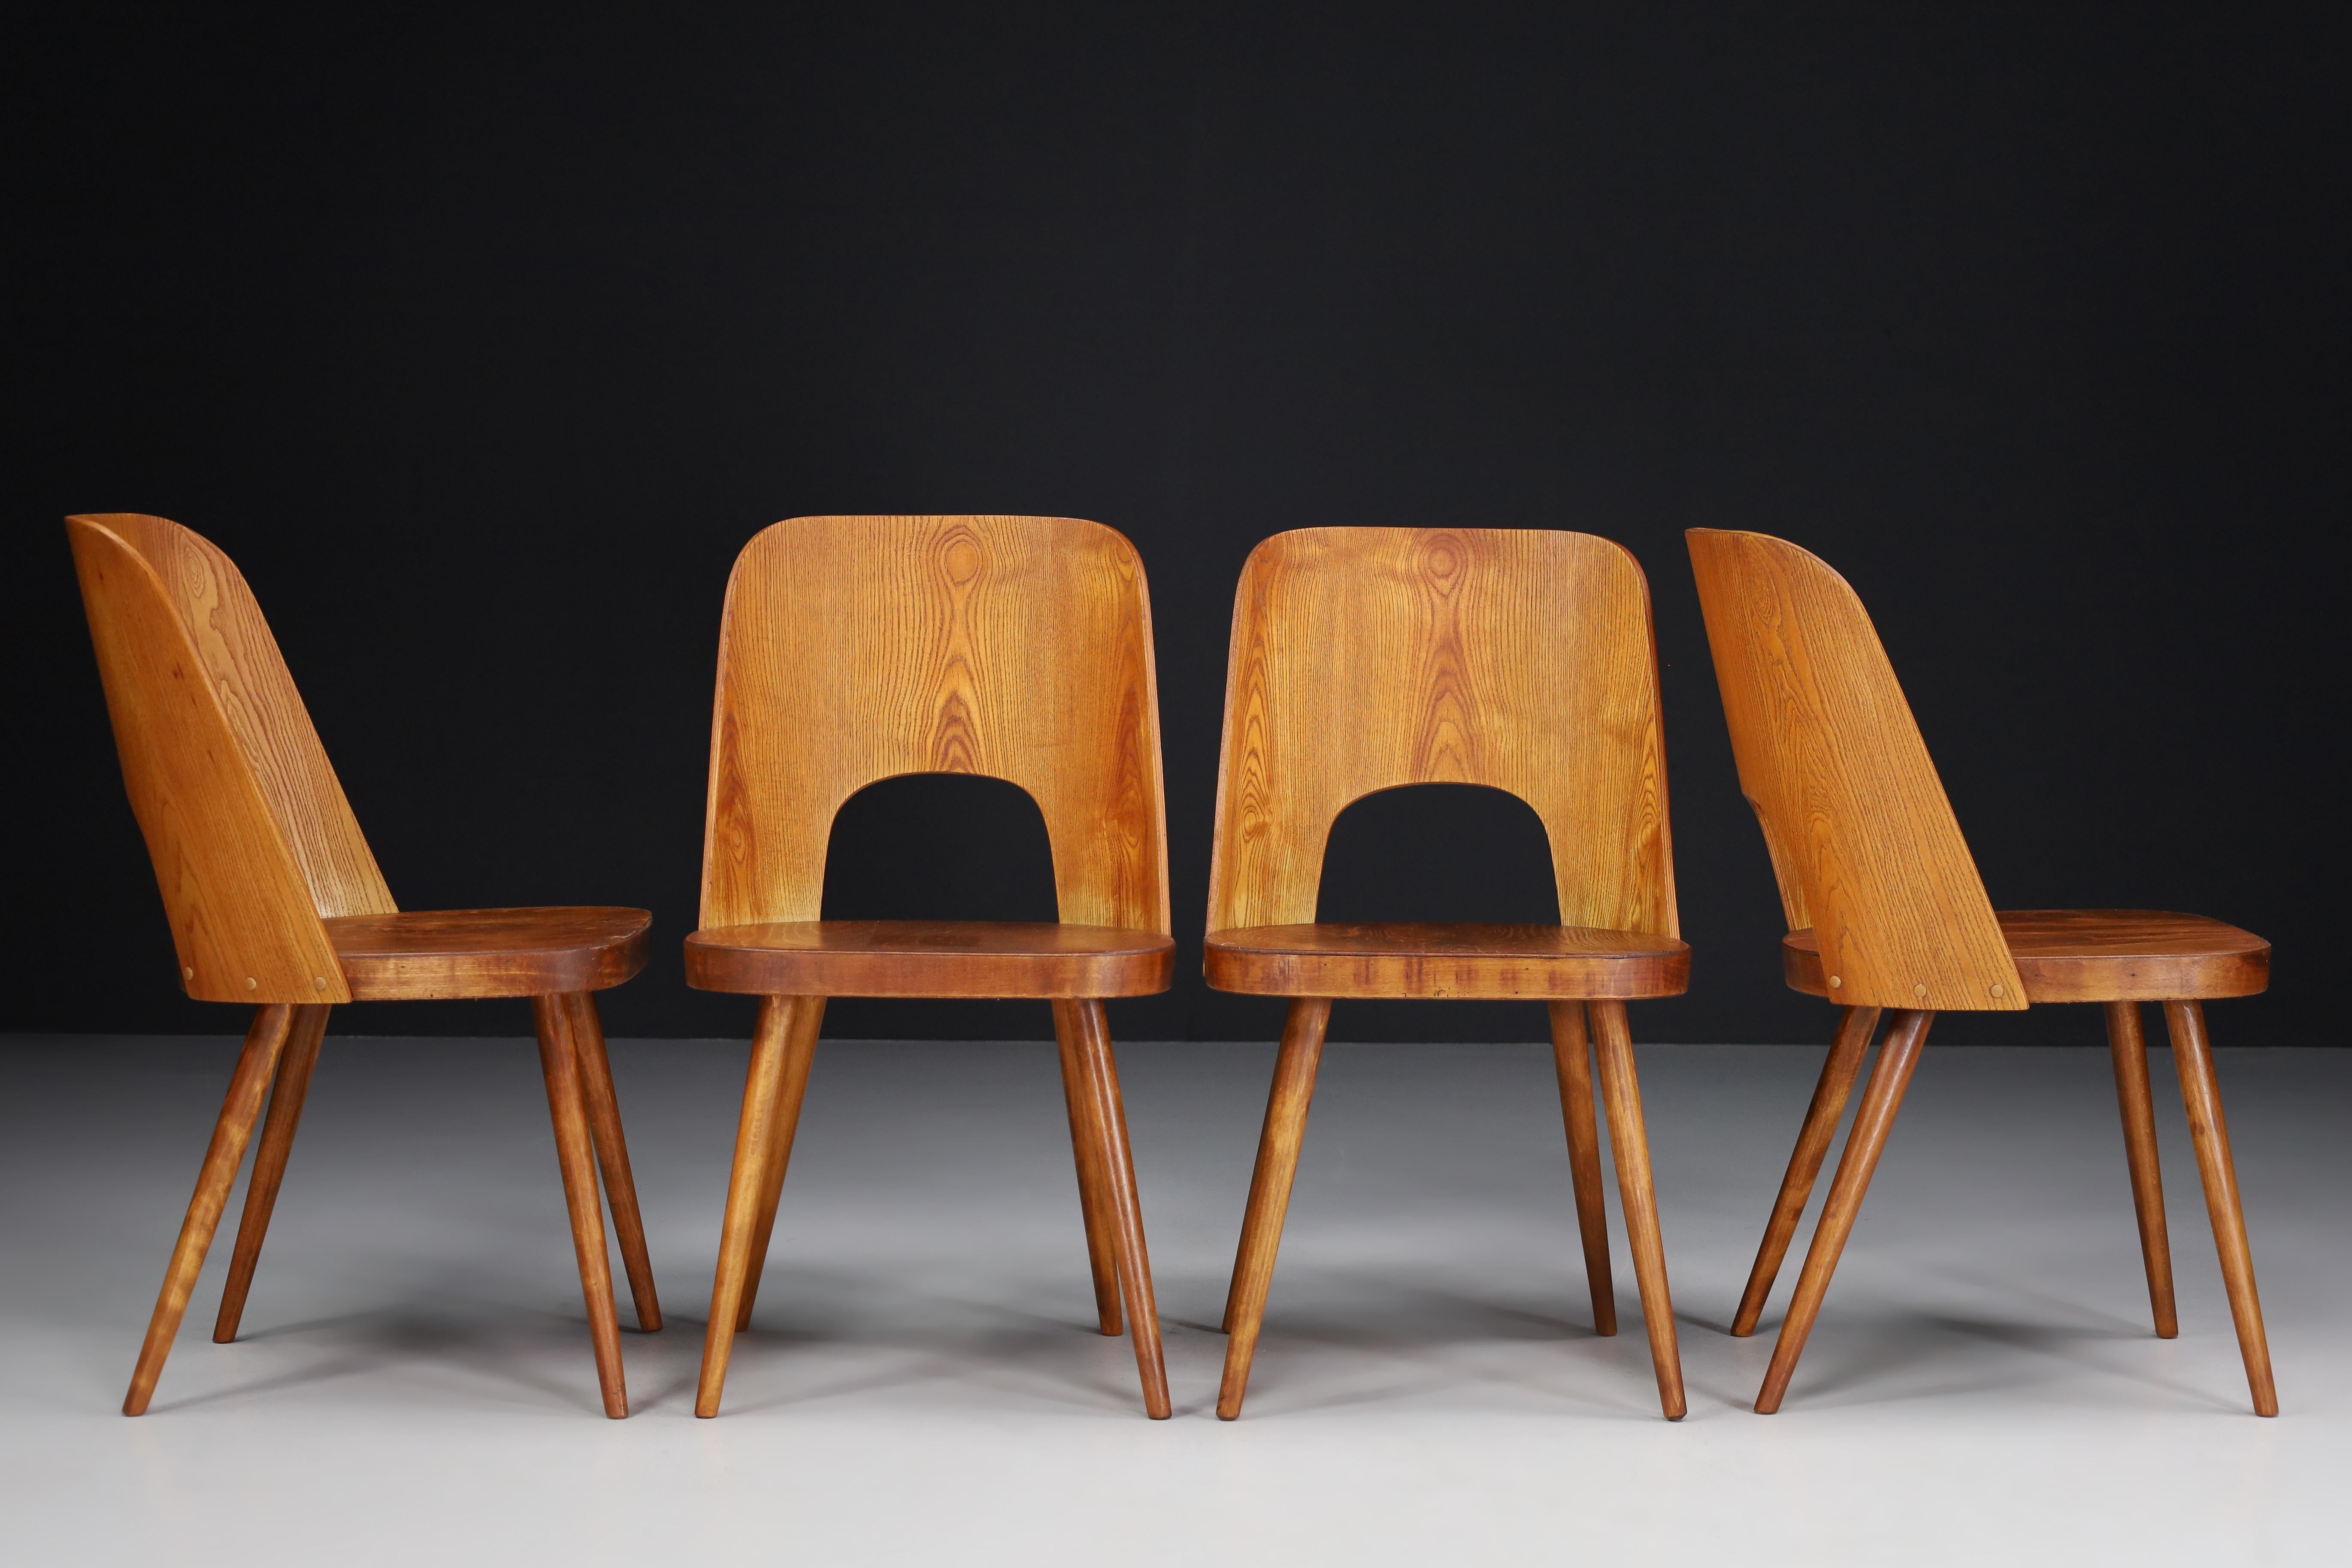 Oswald Haerdtl set of four chairs, the 1950s 

A rare set of four chairs was designed by the Austrian designer Oswald Haerdtl and produced by Ton (Thonet) in the former Czechoslovakia 1950s. Characteristic ash wood chairs, curved backrest, wooden